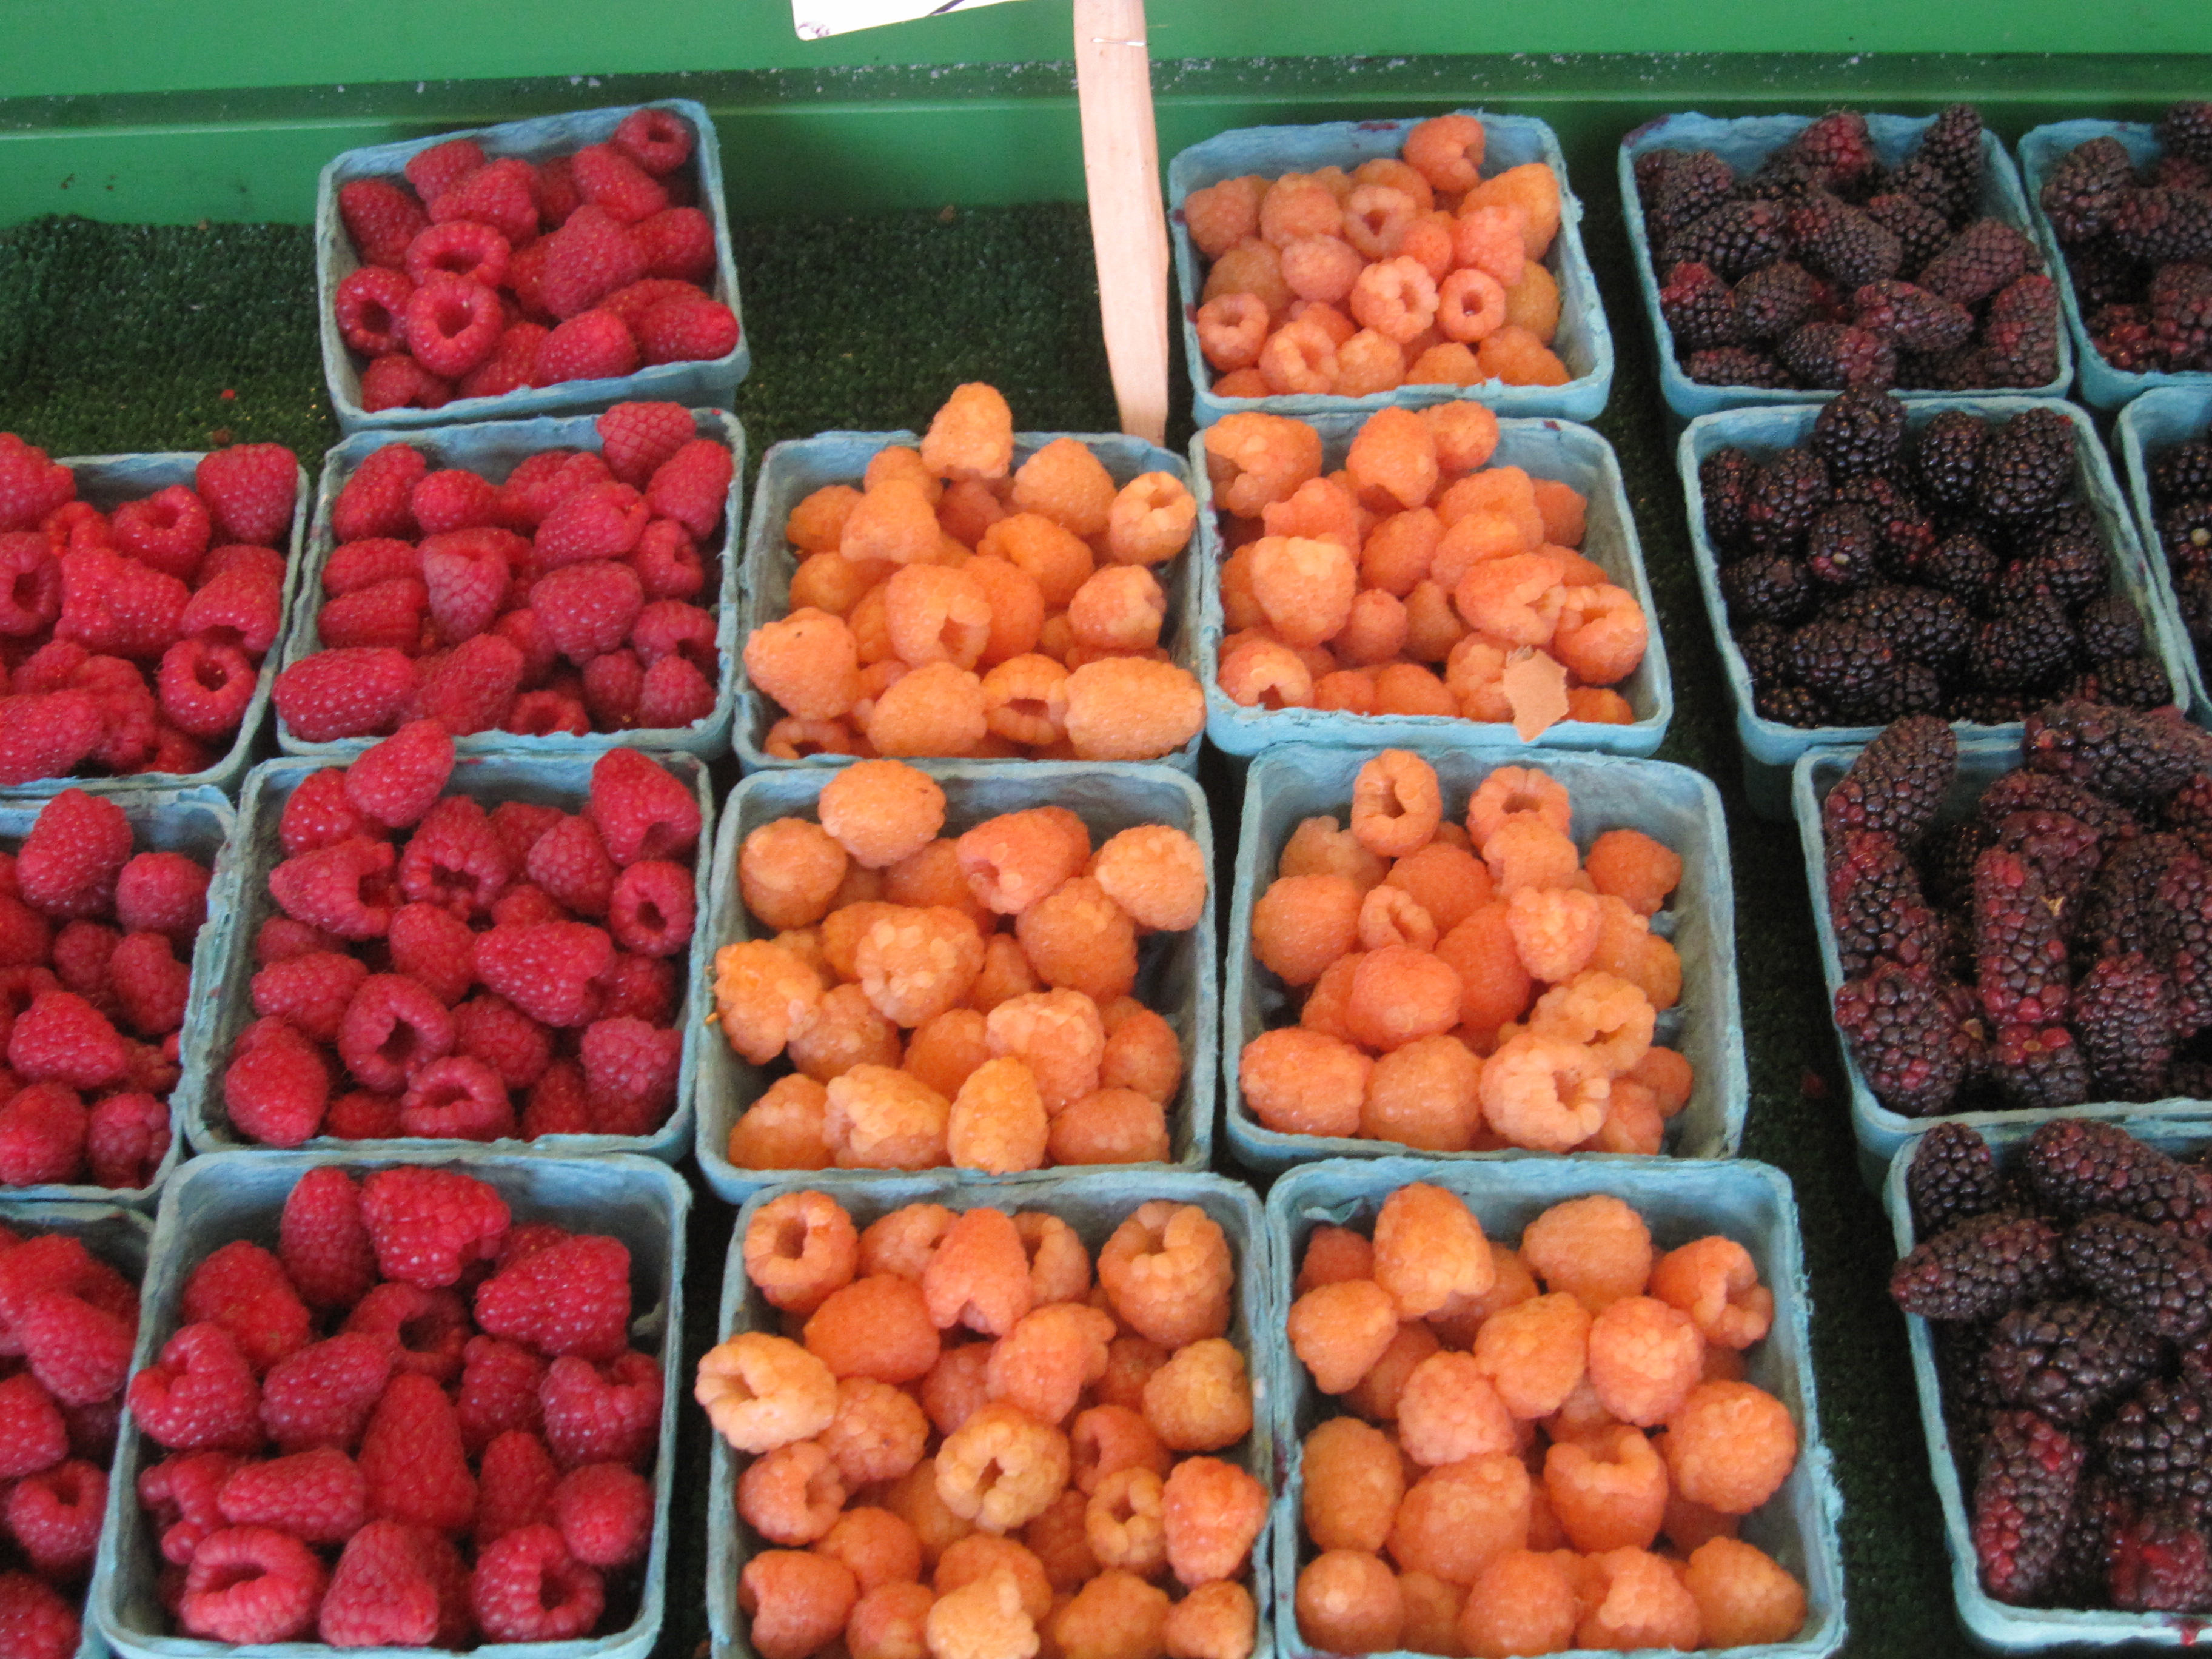 Berries at Seattle's Pike Place Market